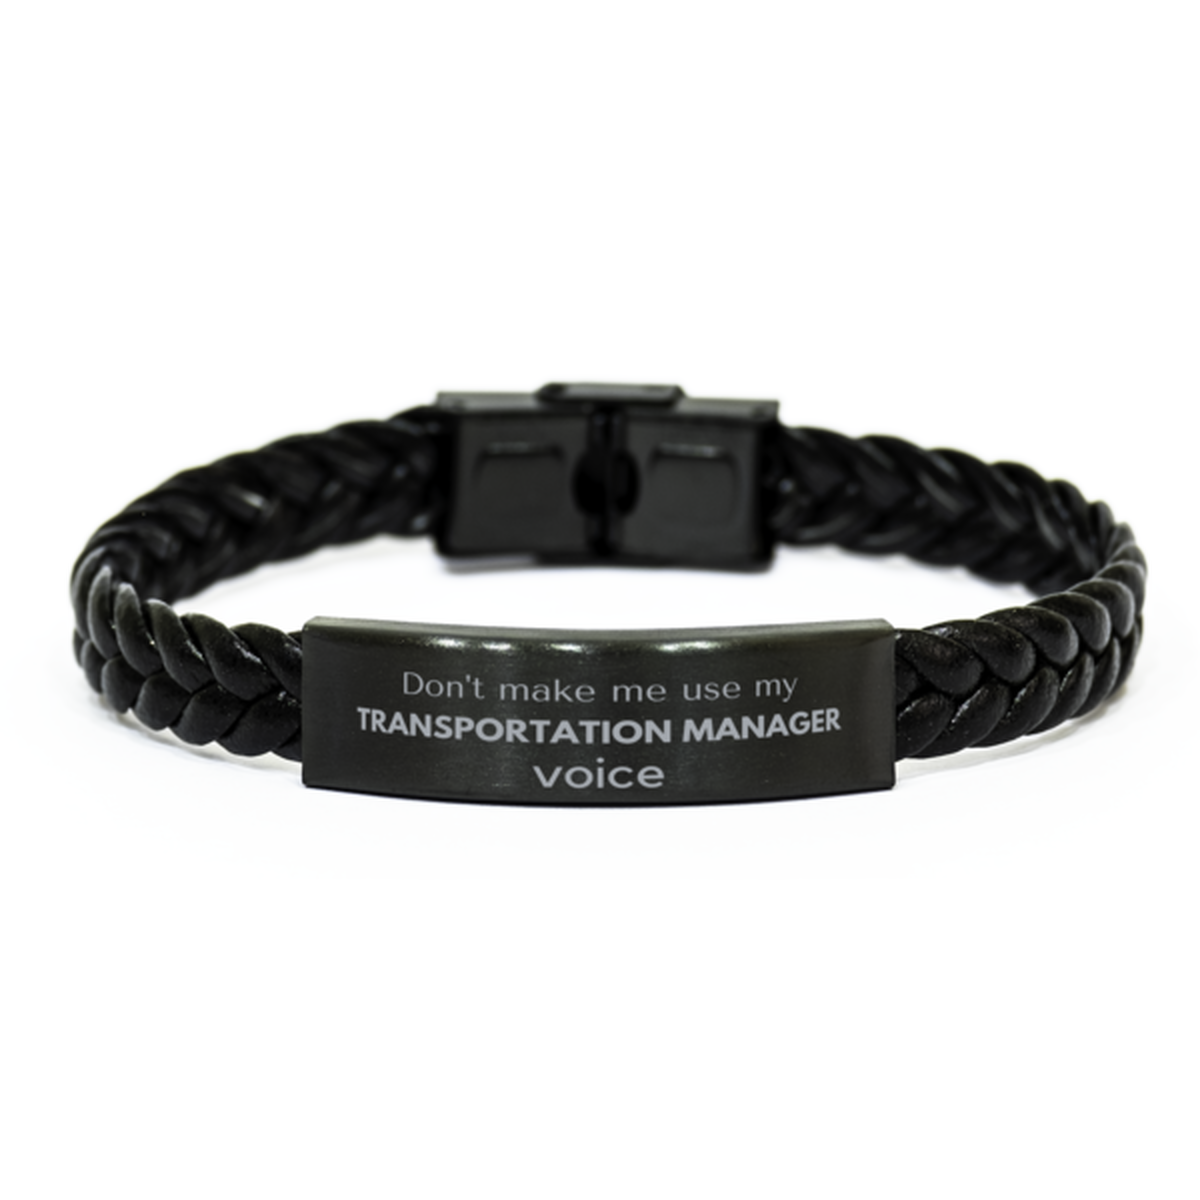 Don't make me use my Transportation Manager voice, Sarcasm Transportation Manager Gifts, Christmas Transportation Manager Braided Leather Bracelet Birthday Unique Gifts For Transportation Manager Coworkers, Men, Women, Colleague, Friends